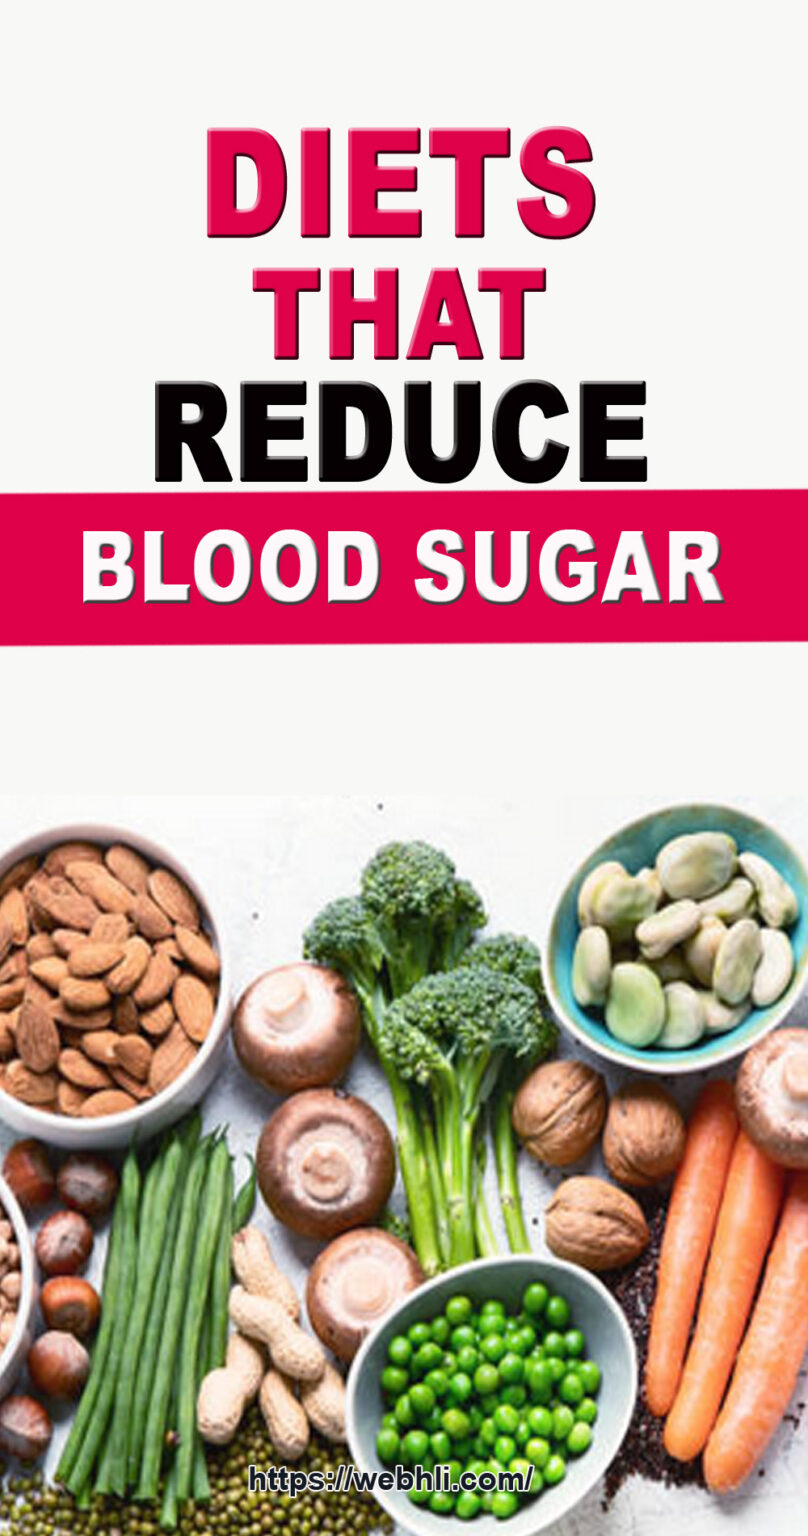 Diets that Reduce Blood Sugar | Healthy Lifestyle